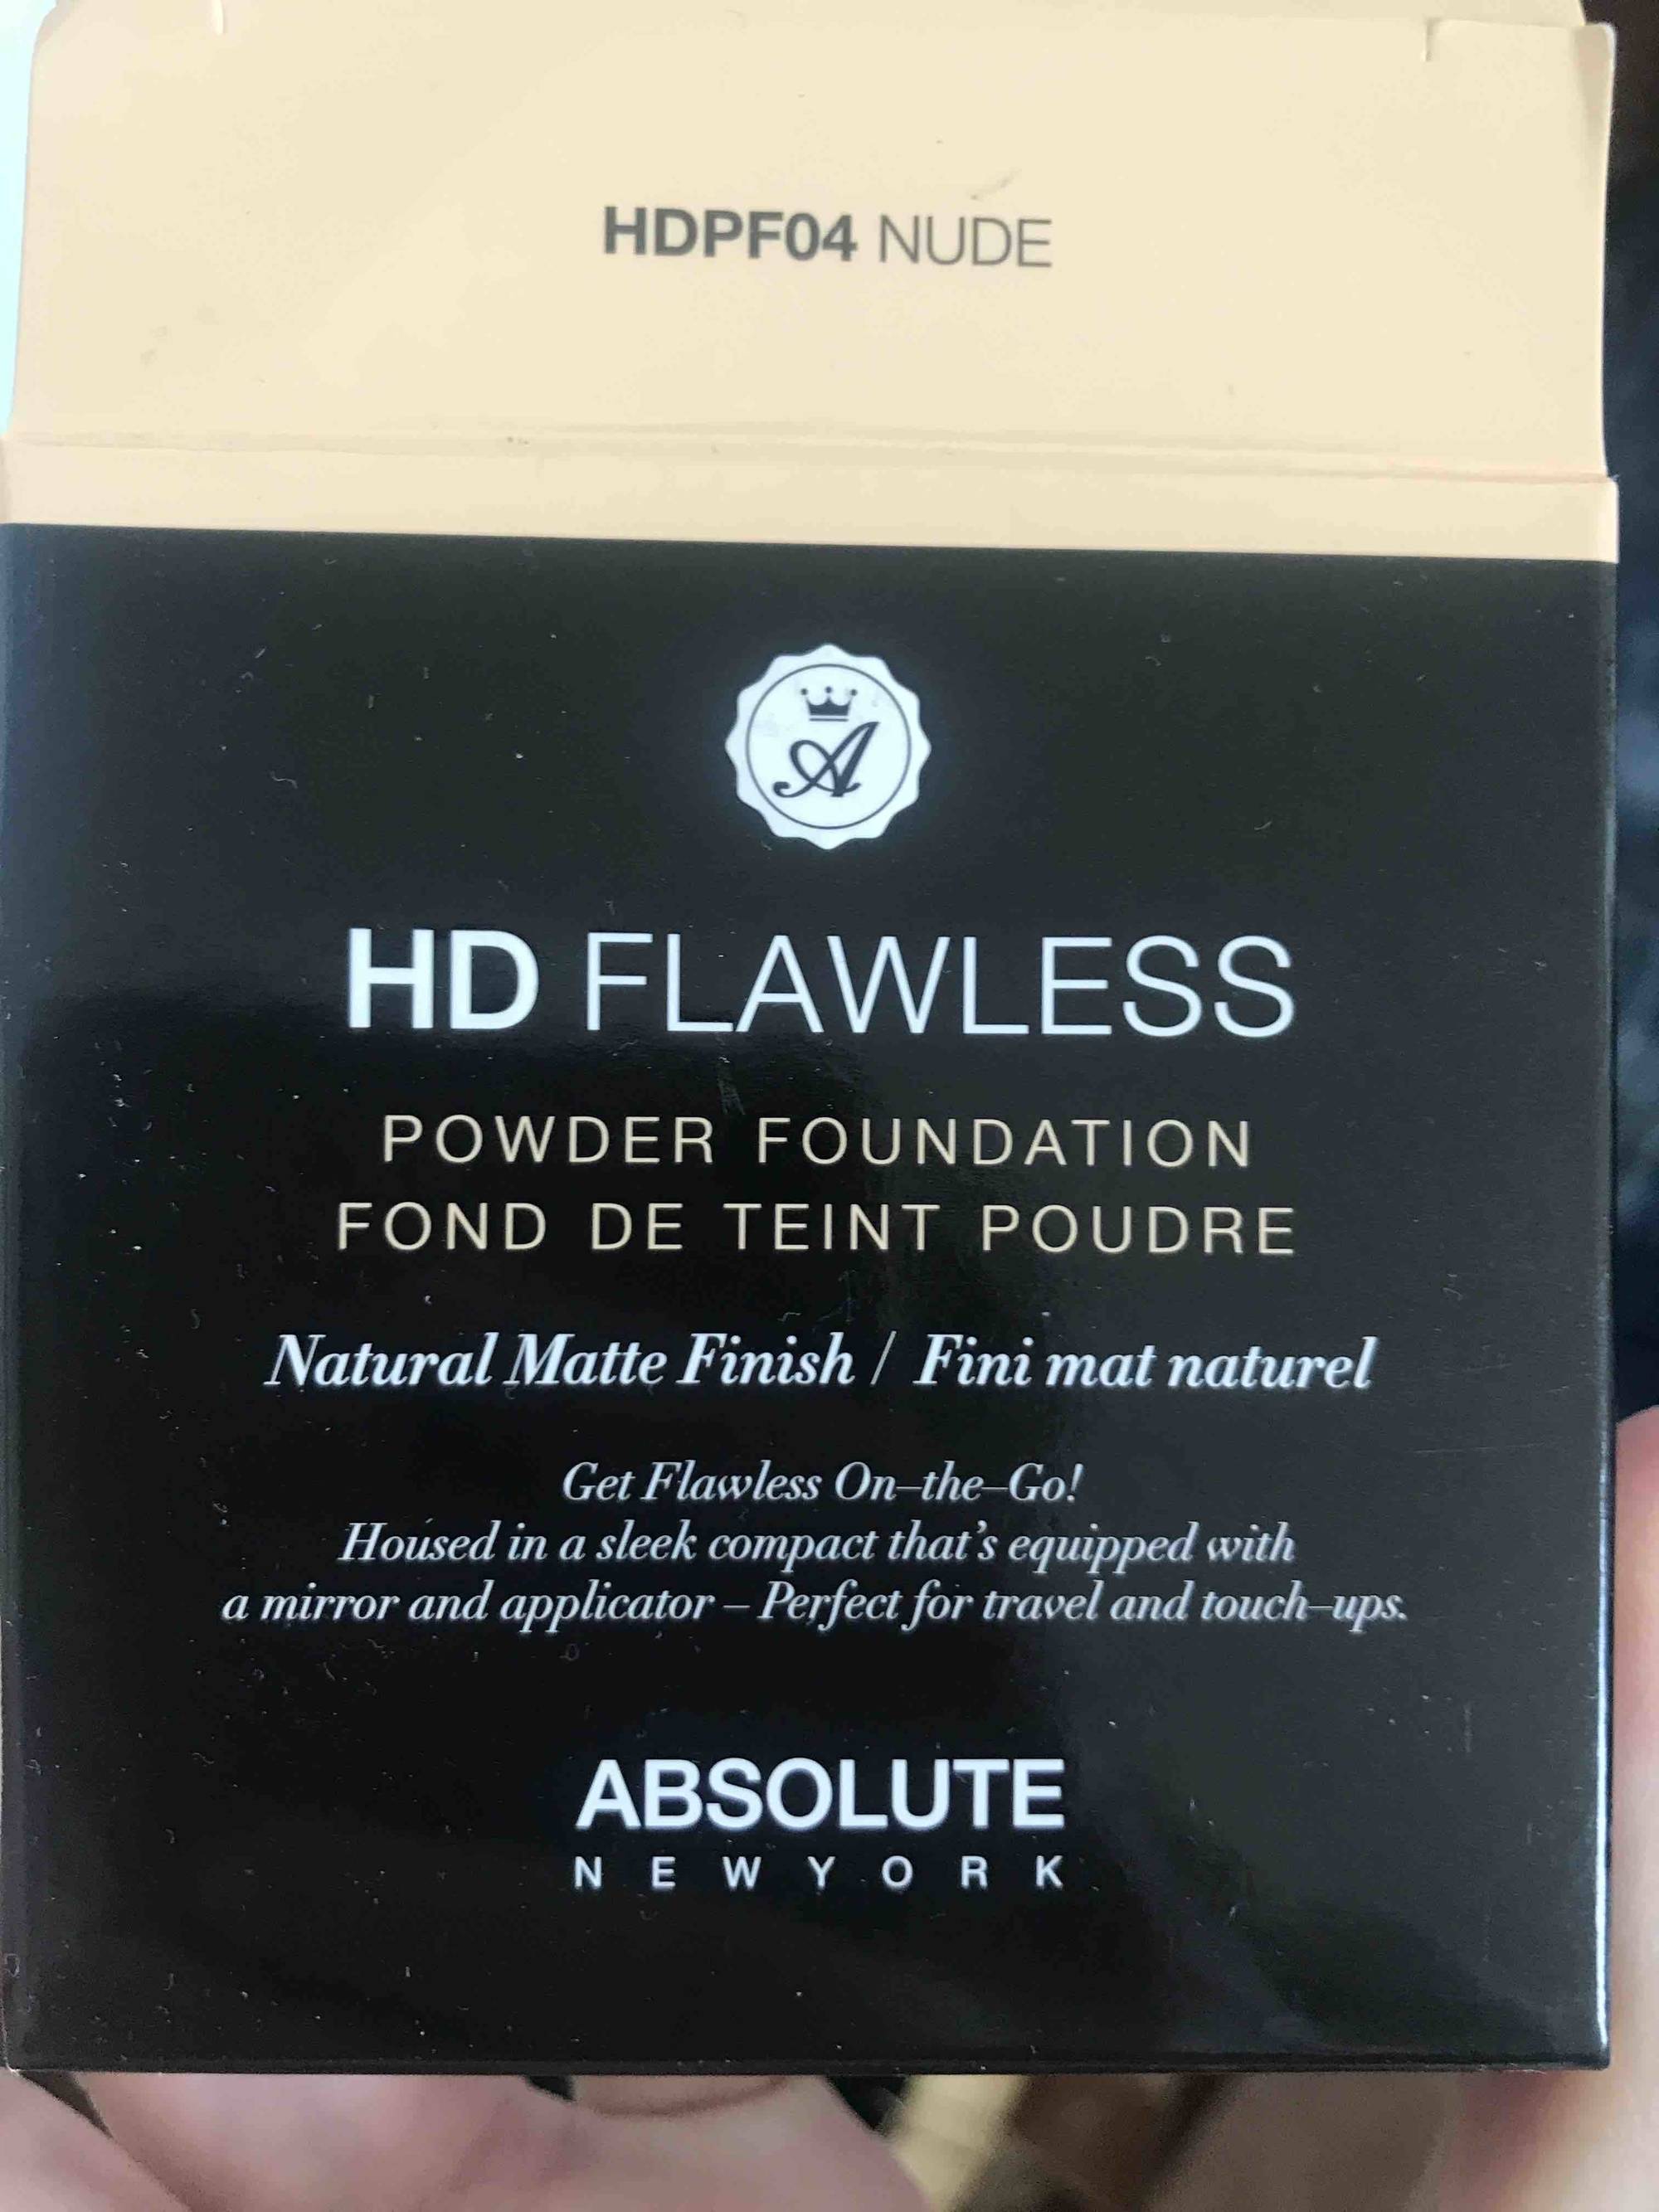 ABSOLUTE NEW YORK - HD flawless - Fond de teint poudre HDPF04 nude